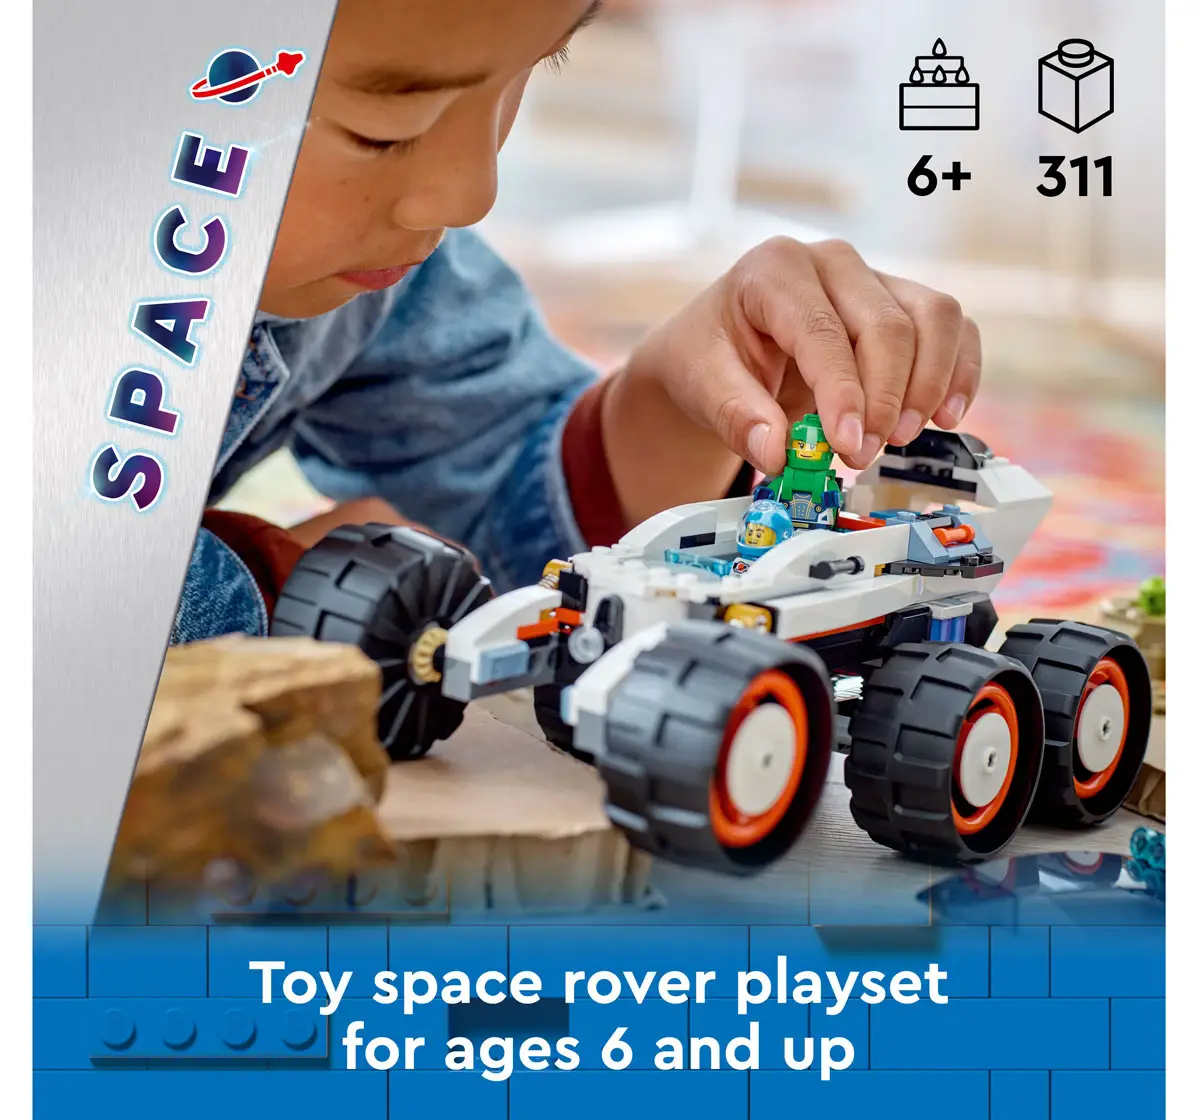 Lego City Space Explorer Rover And Alien Life 60431 Multicolour For Kids Ages 6Y+ (311 Pieces) 